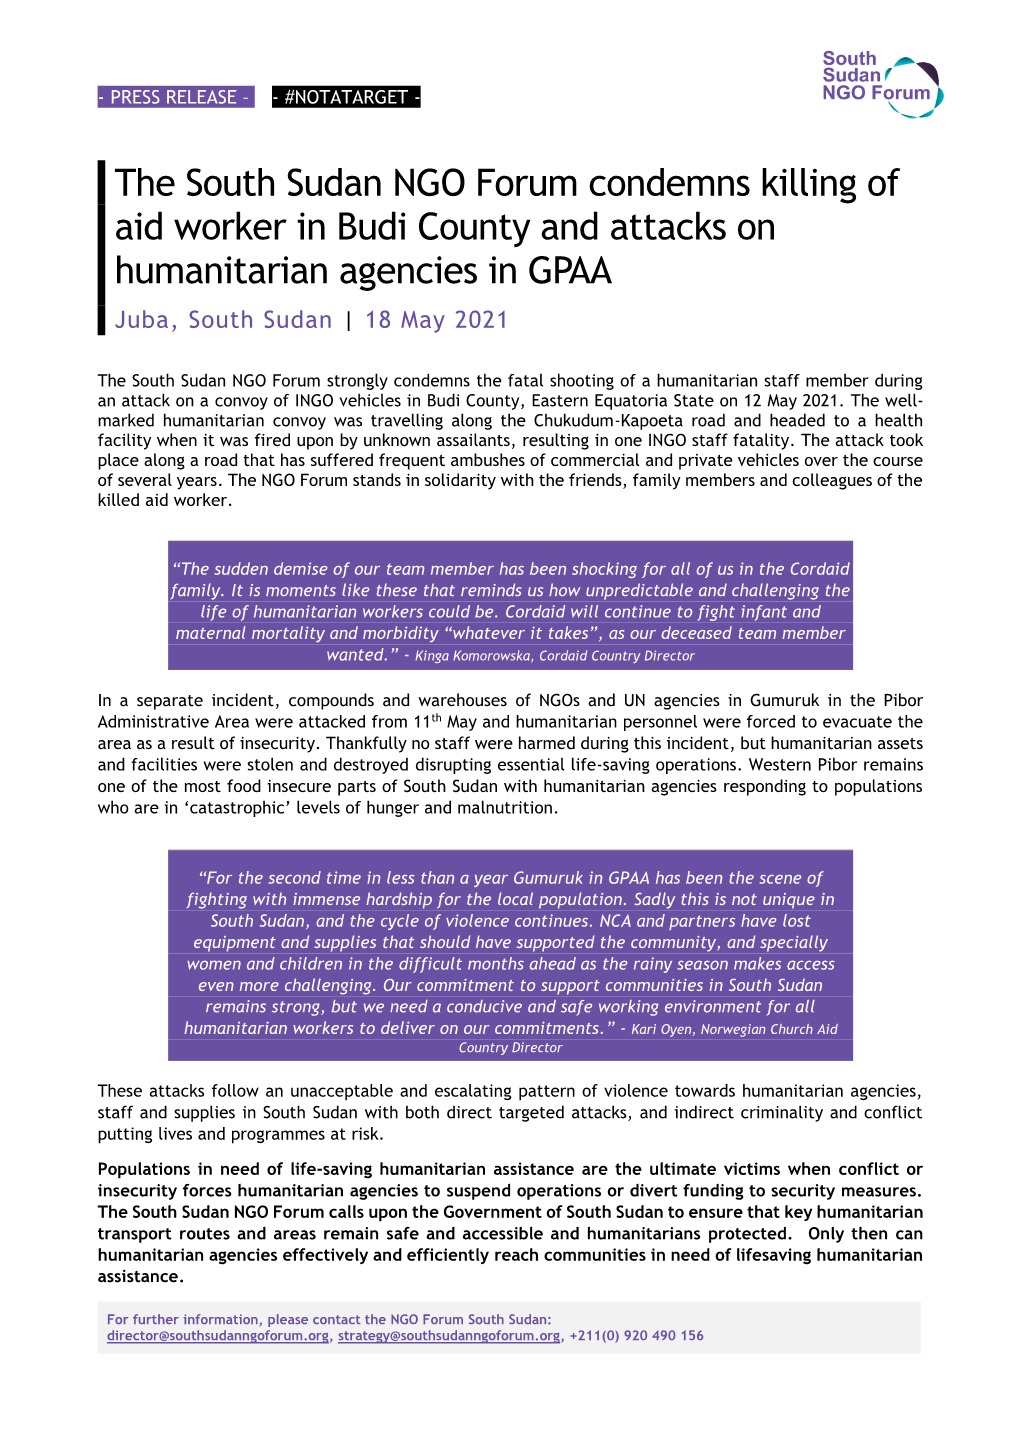 The South Sudan NGO Forum Condemns Killing of Aid Worker in Budi County and Attacks on Humanitarian Agencies in GPAA Juba, South Sudan | 18 May 2021